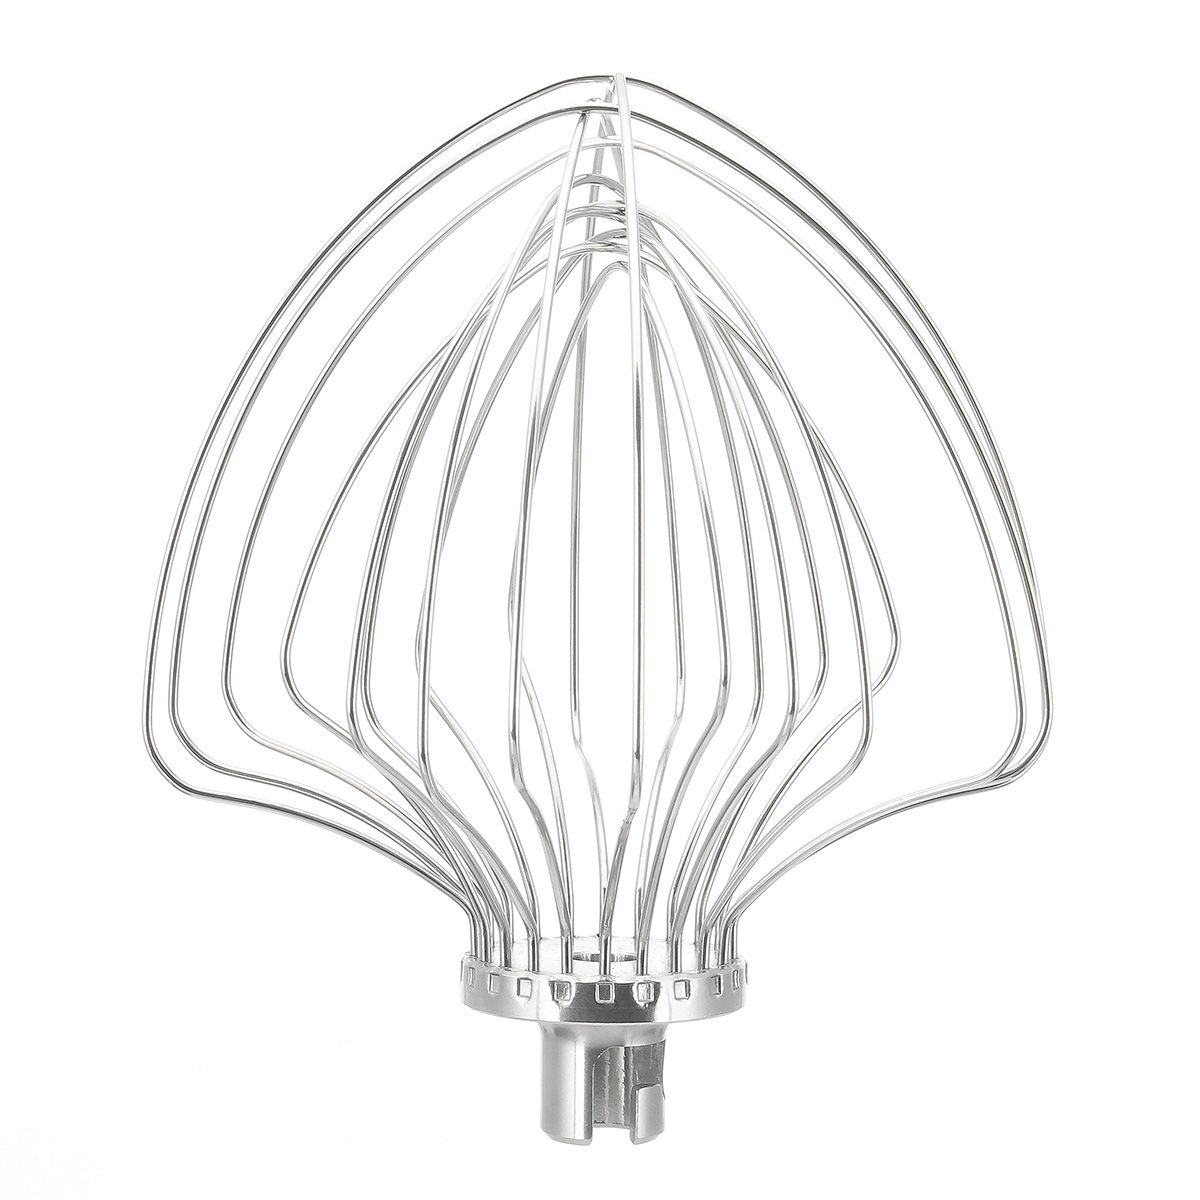 11-Wire-Whip-Egg-Beater-Mixer-Whisk-Beater-Stainless-Steel-For-KitchenAid-5K7EW-1520792